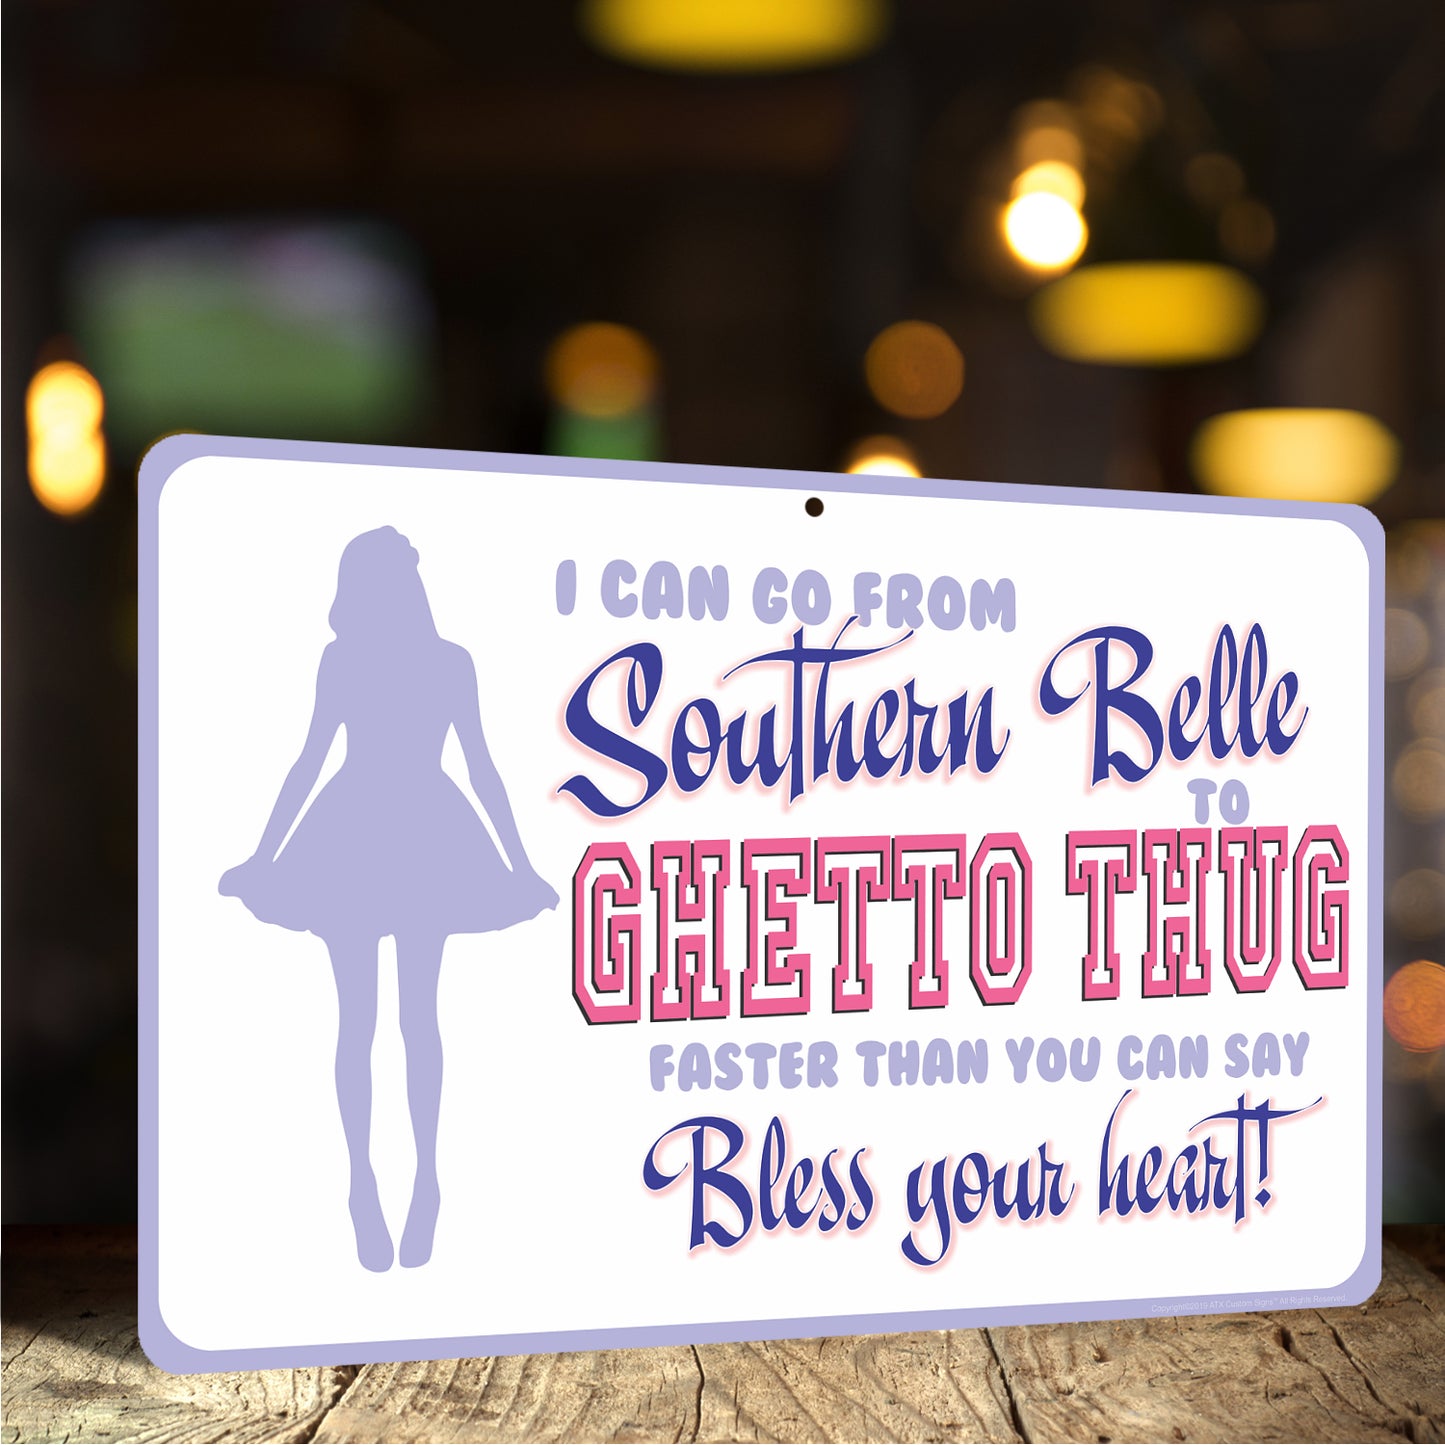 Funny Bar Sign, I can go from Southern Belle to Ghetto Thug faster that you can say Bless your heart! (Light) - Size 8 x 12